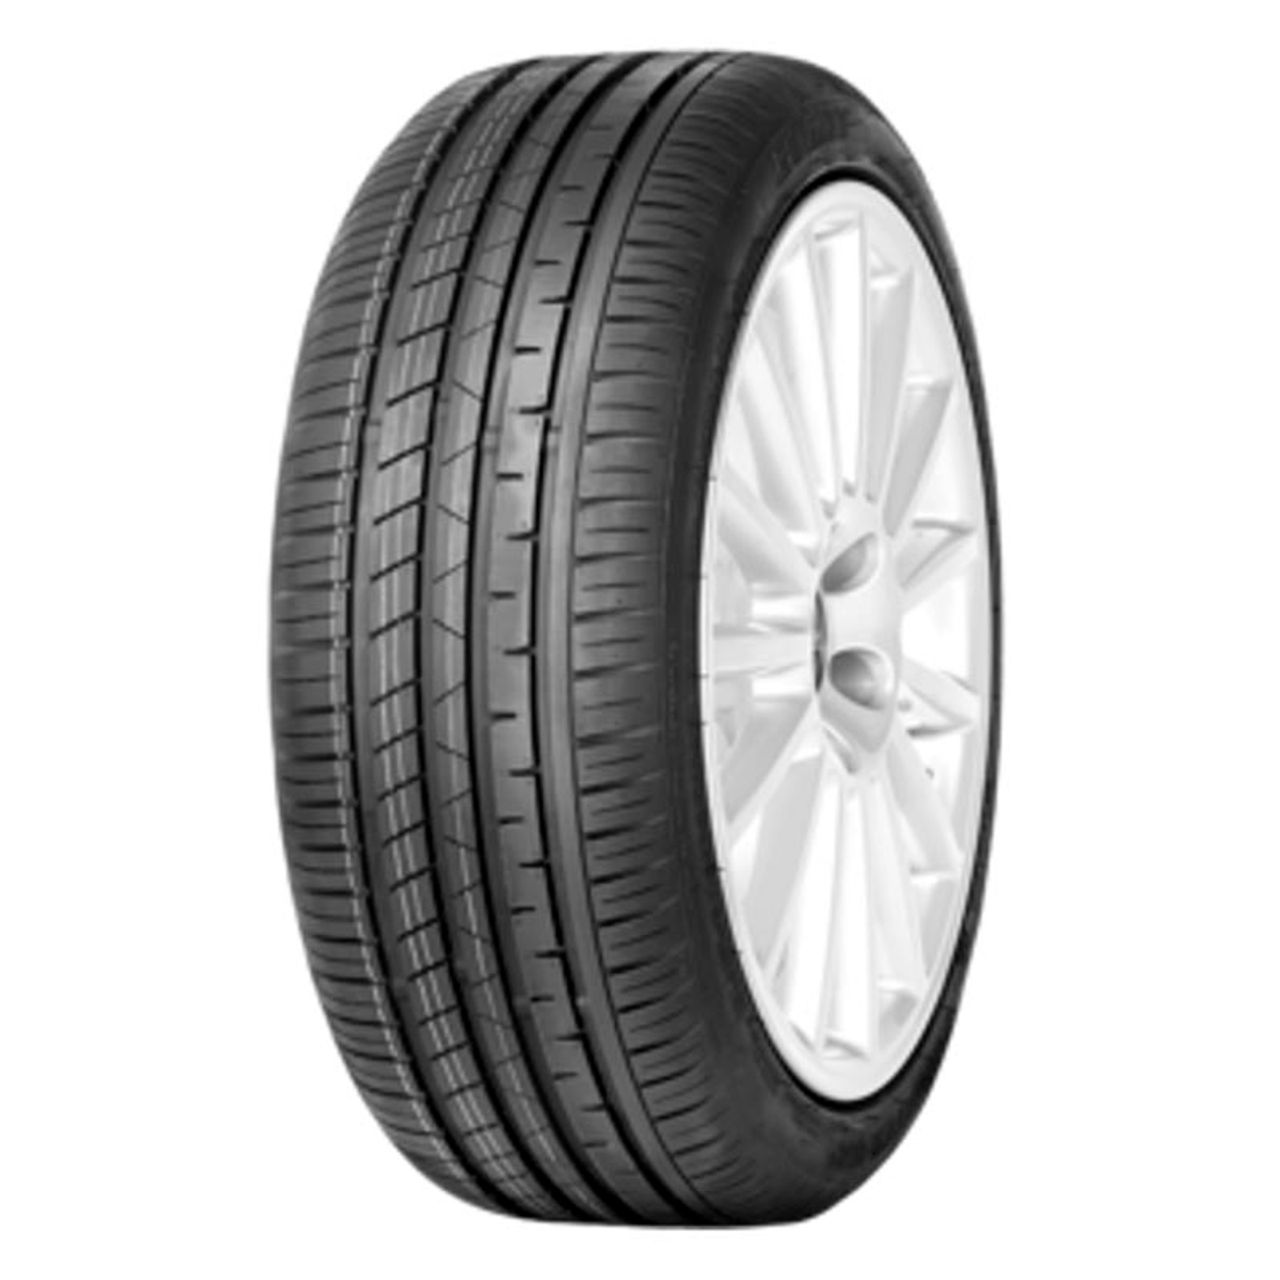 EVENT POTENTEM UHP 205/55R16 94W BSW XL